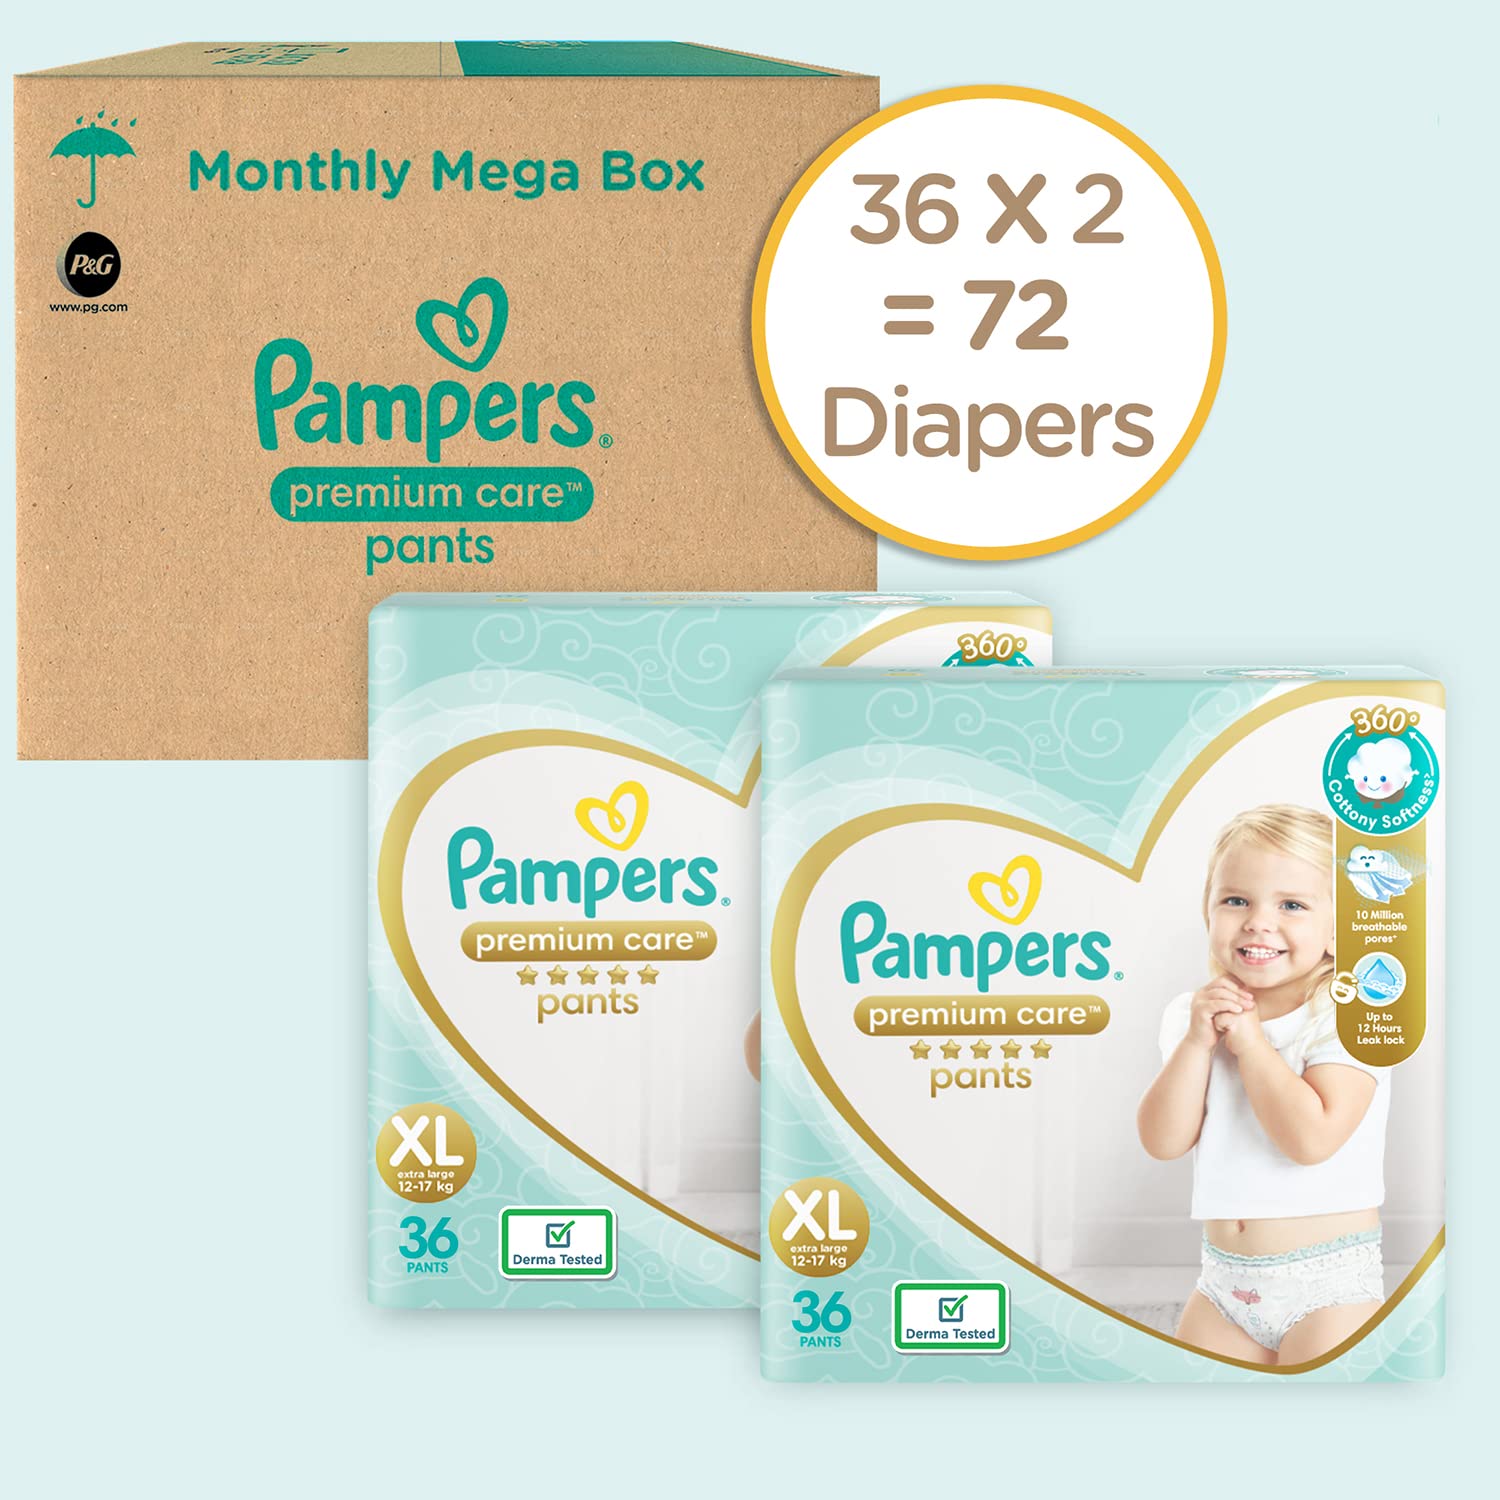 MoreFreedomMoreFun with Pampers premium care pants the SoftestForBabySkin   the tin trunk